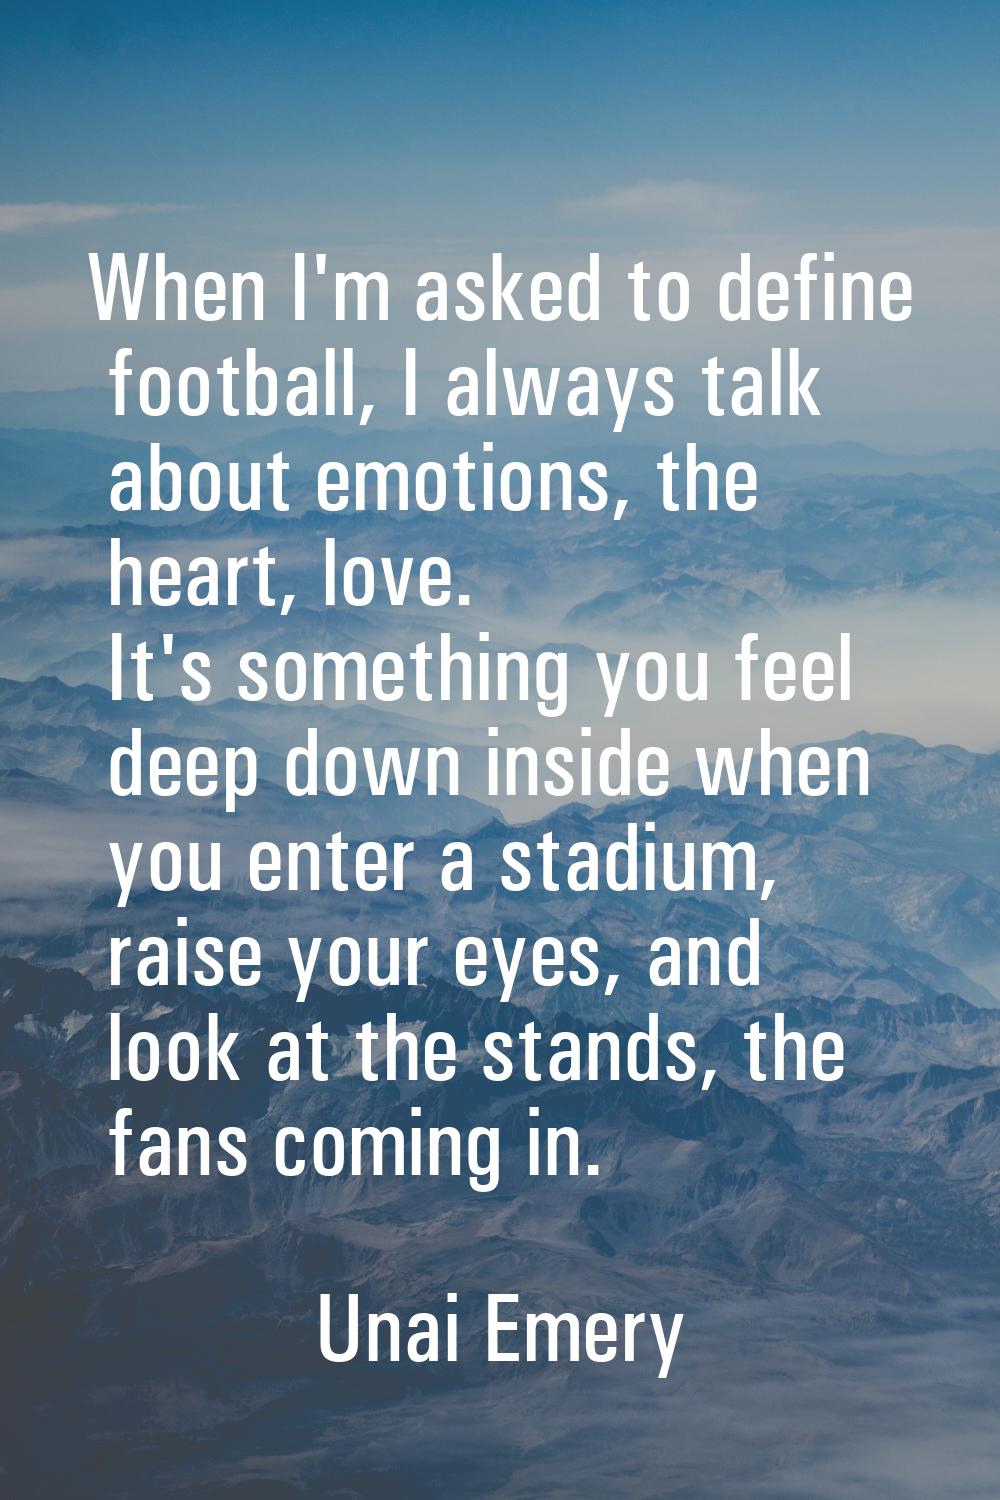 When I'm asked to define football, I always talk about emotions, the heart, love. It's something yo